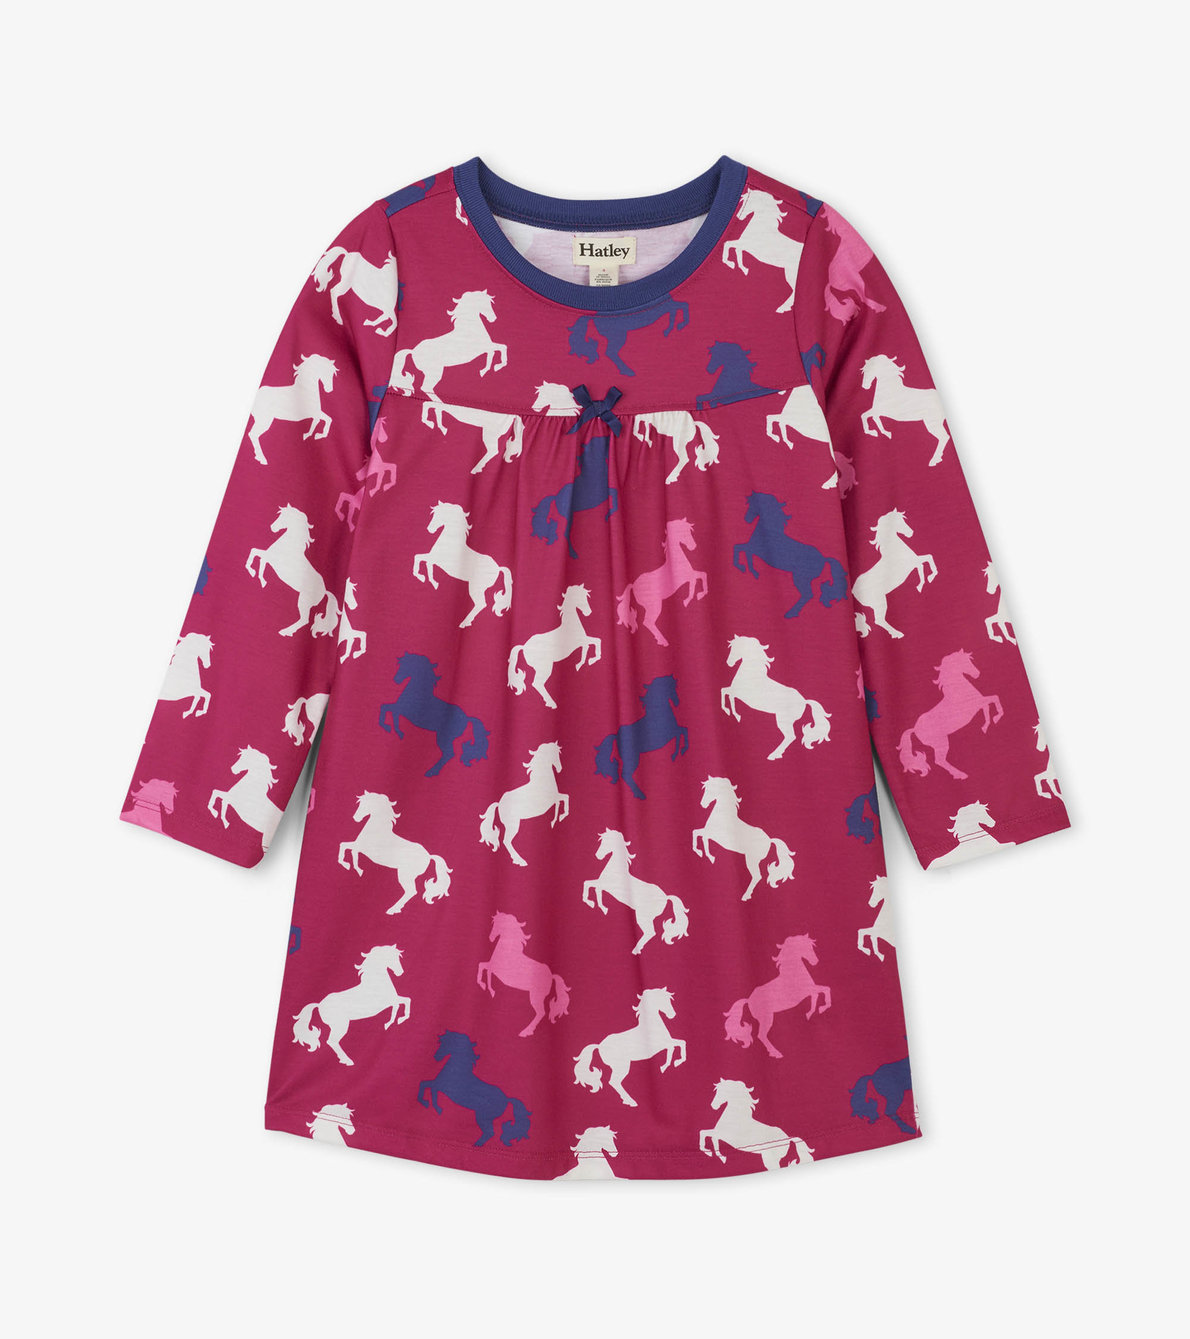 View larger image of Playful Horses Nightdress